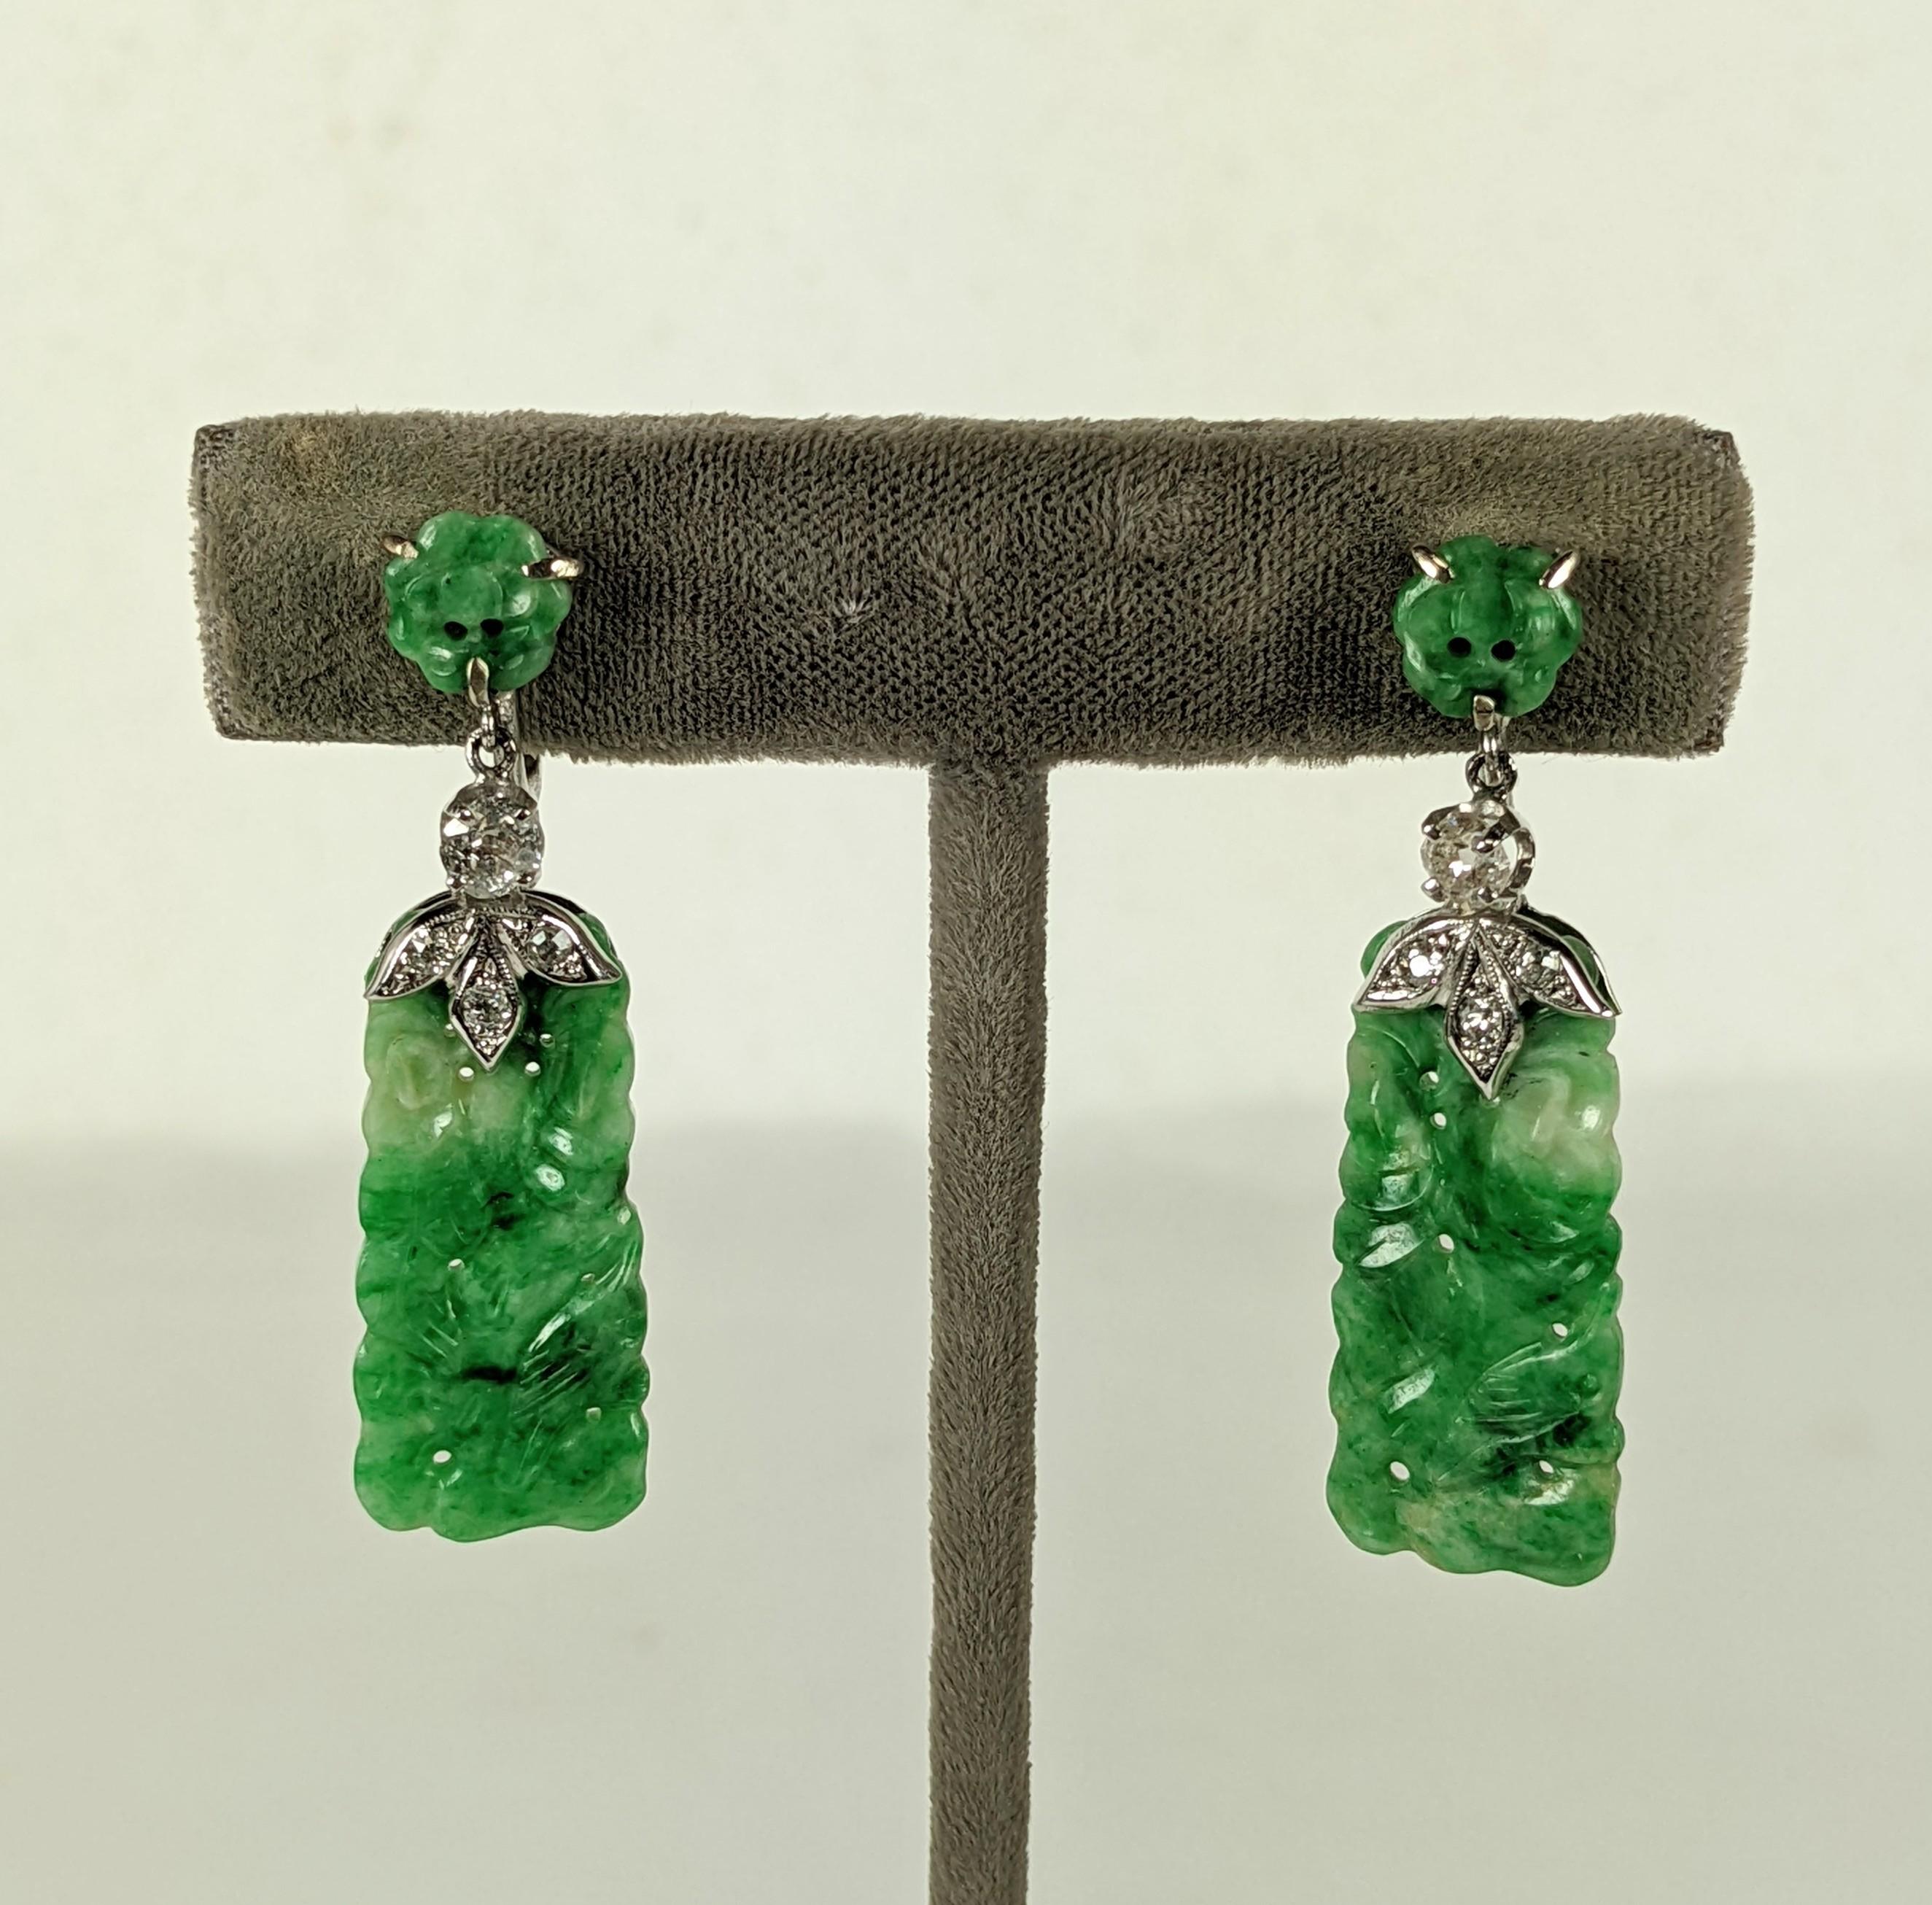 Art Deco Jade Diamond Earrings from the 1930's set in 14k white gold. Carved antique jade panels are held by a diamond floriform top with antique cut diamond (approx. 20 points) connectors. Jade carved flower at ear with screw back fittings.
1930's